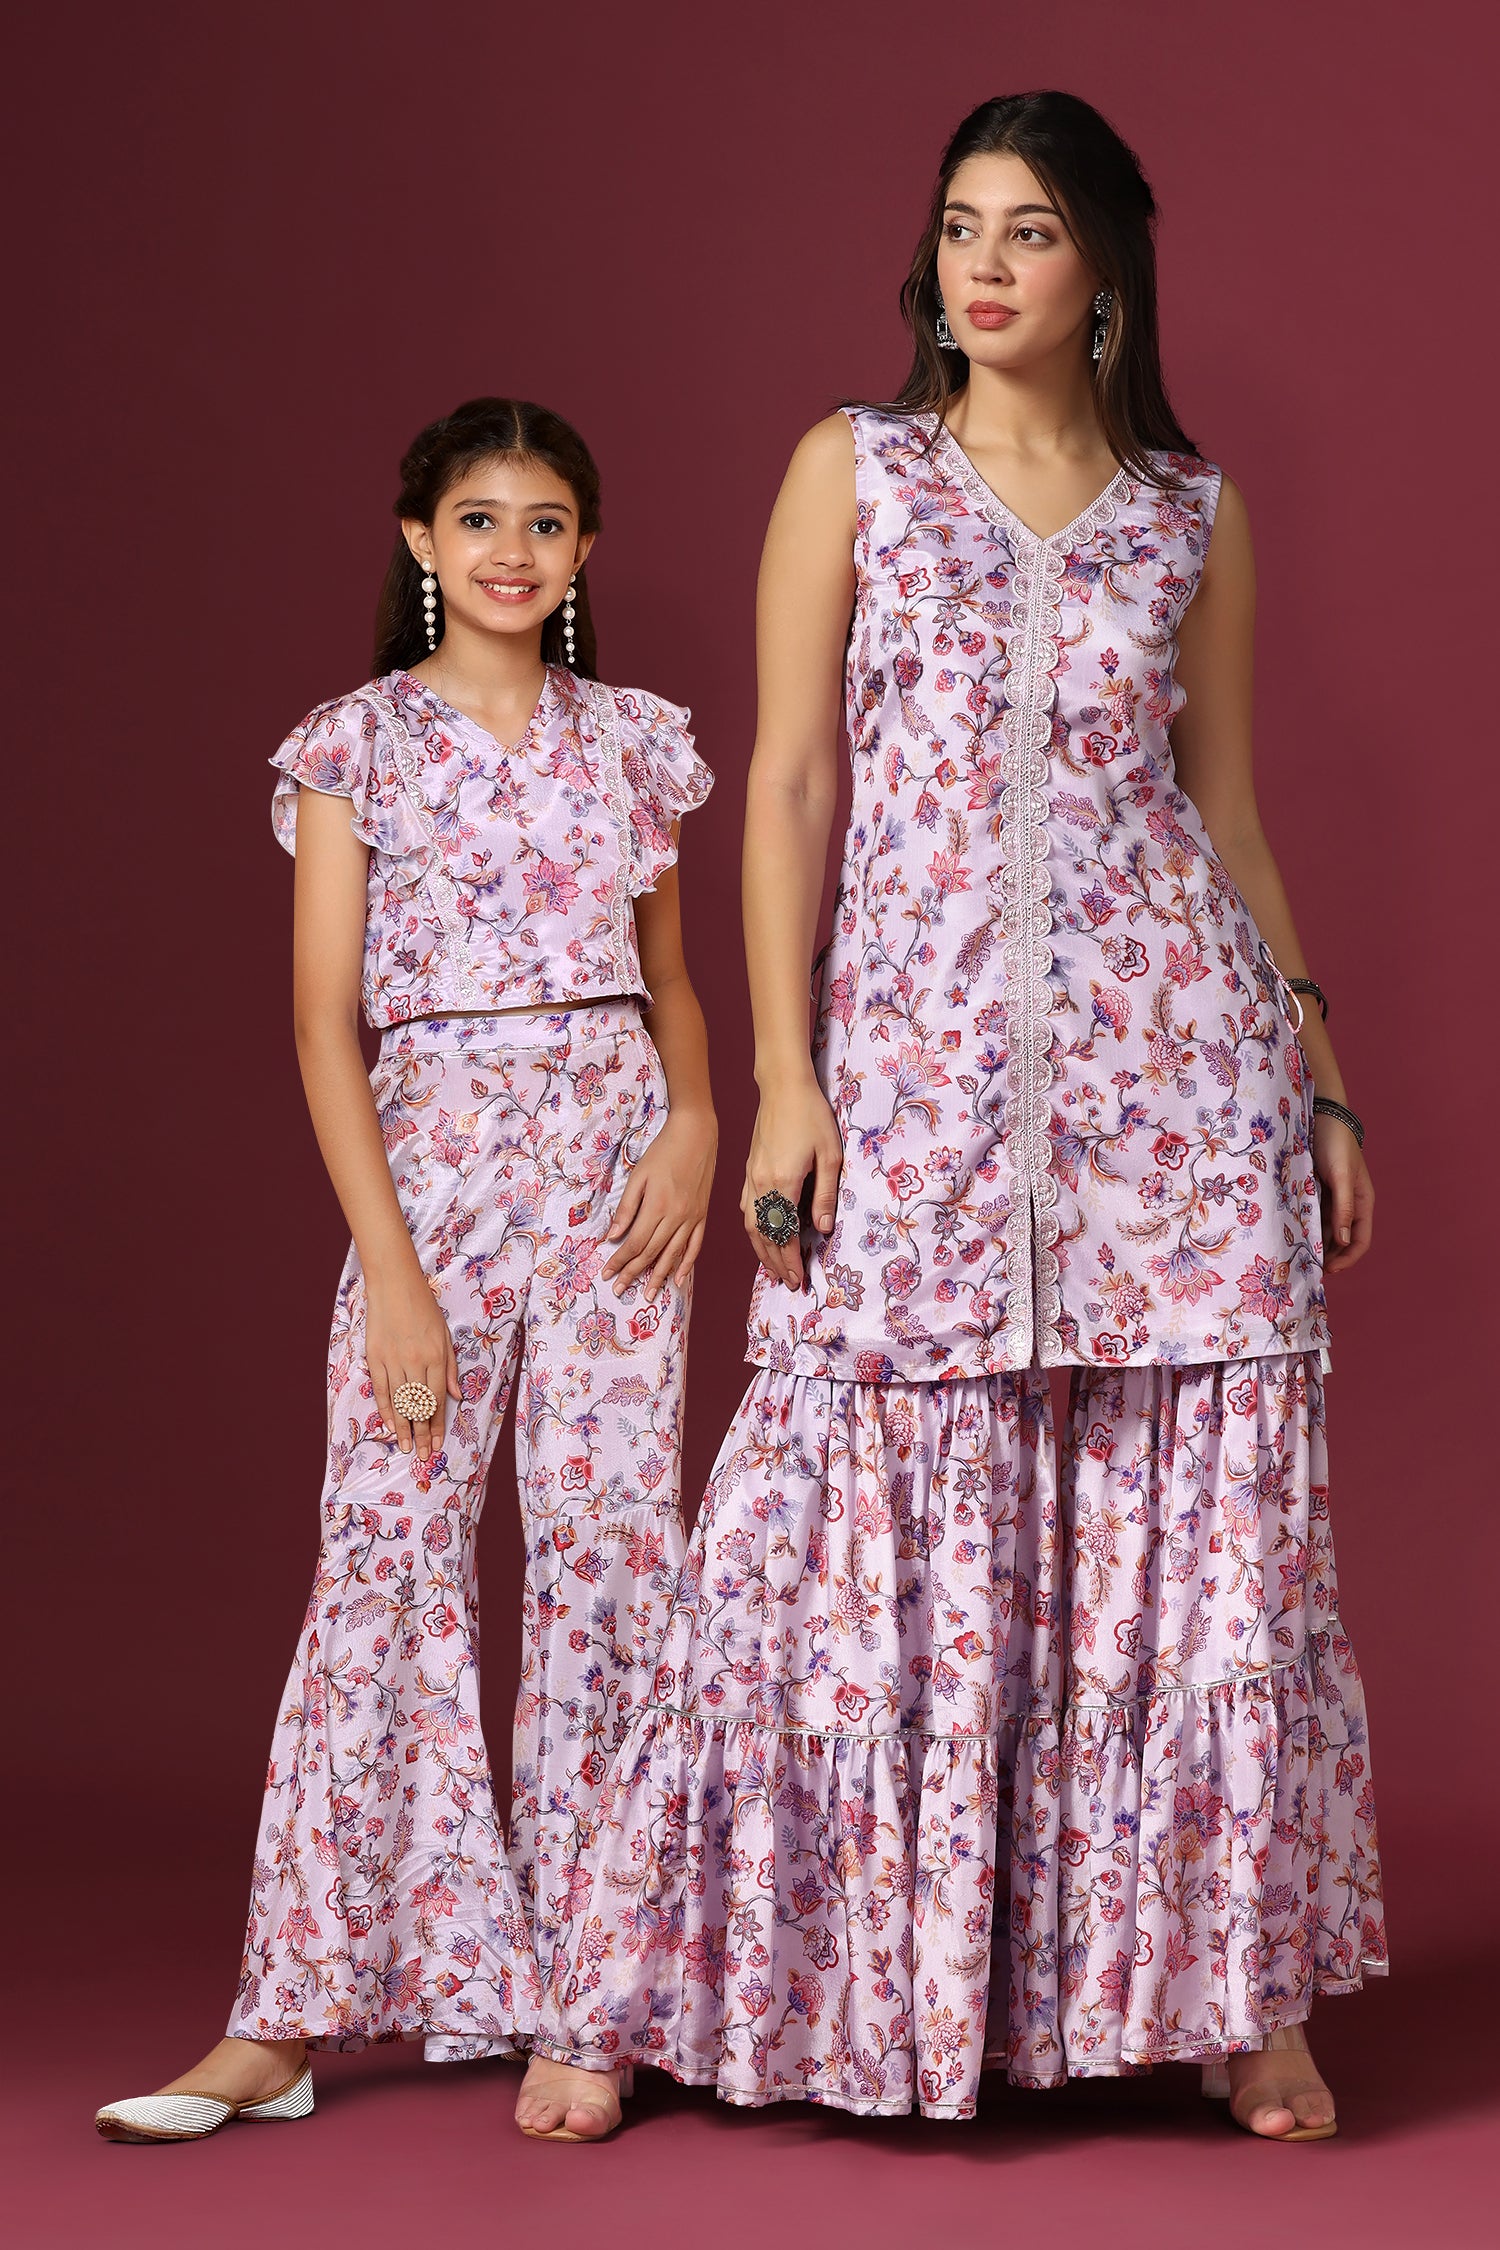 Kids Clothing - Buy Kids Clothes, Dresses & Bottom wear Online in India